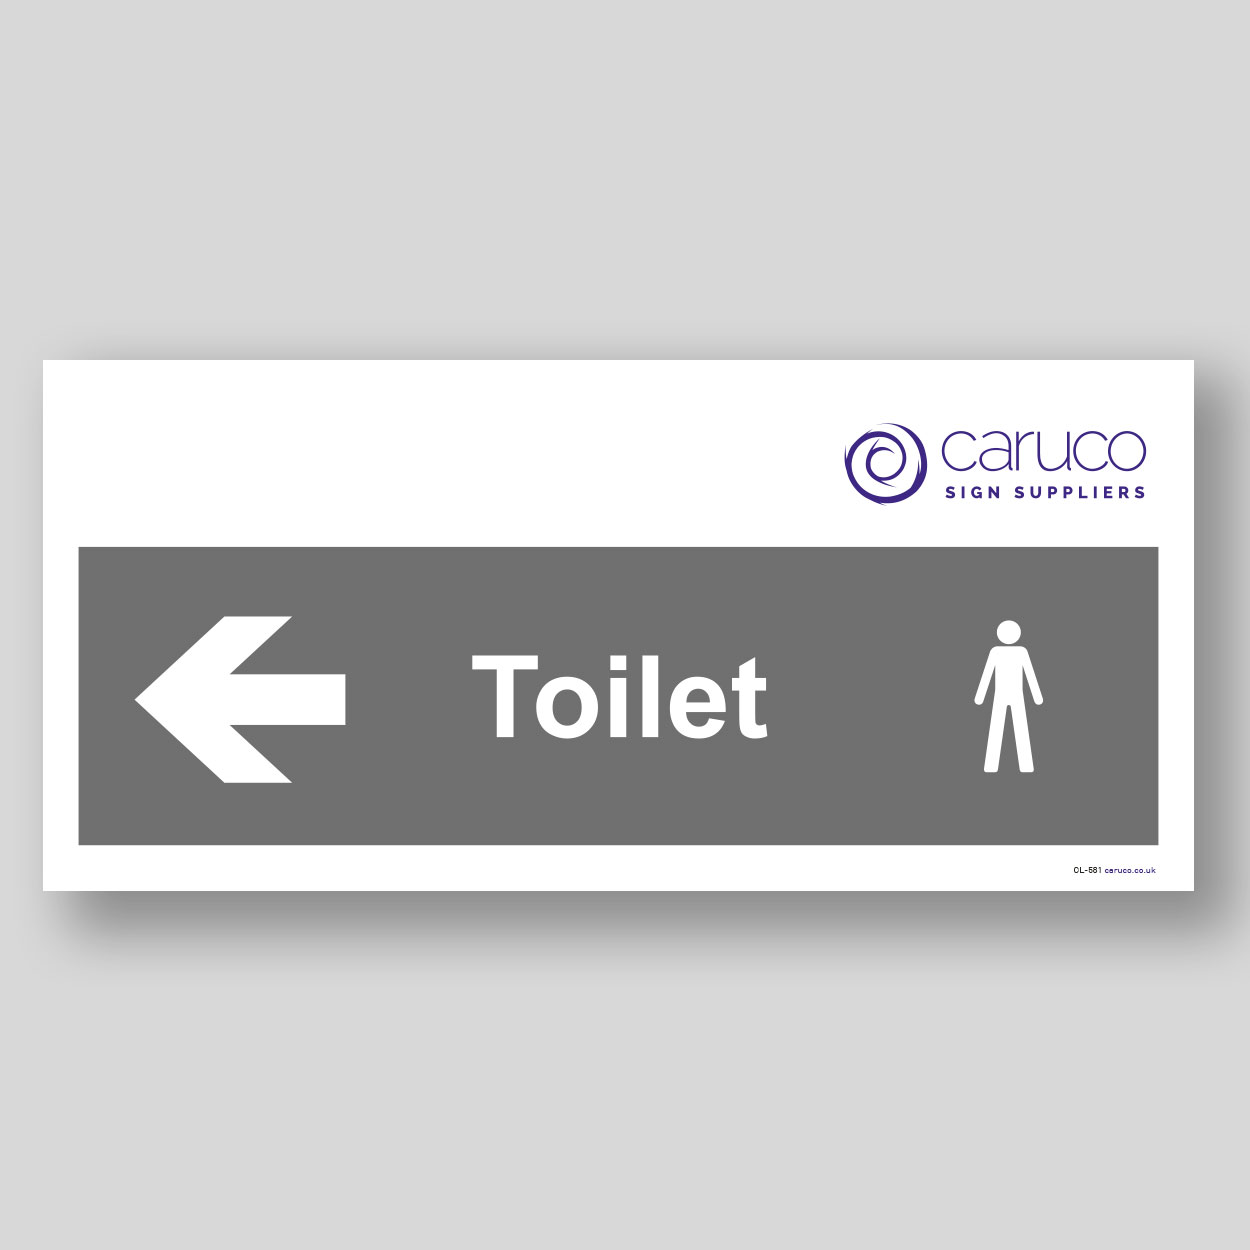 CL-581 Male toilet with left arrow